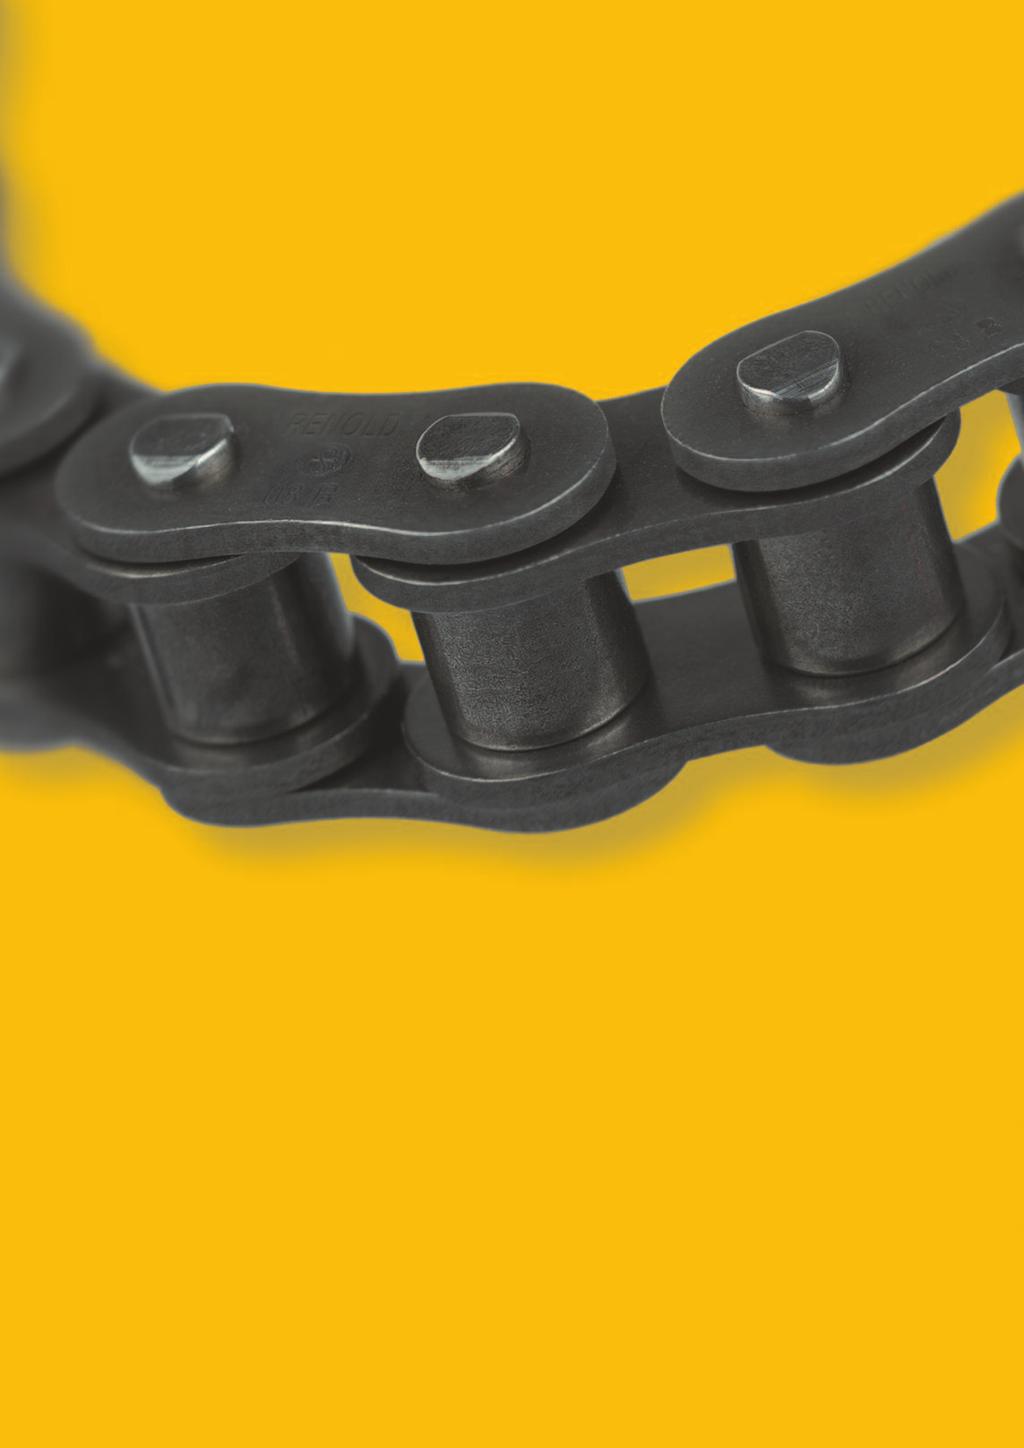 5 I New A&S chain includes solid extruded bush and roller components, not the weaker curled bushes offered by some other manufacturers.